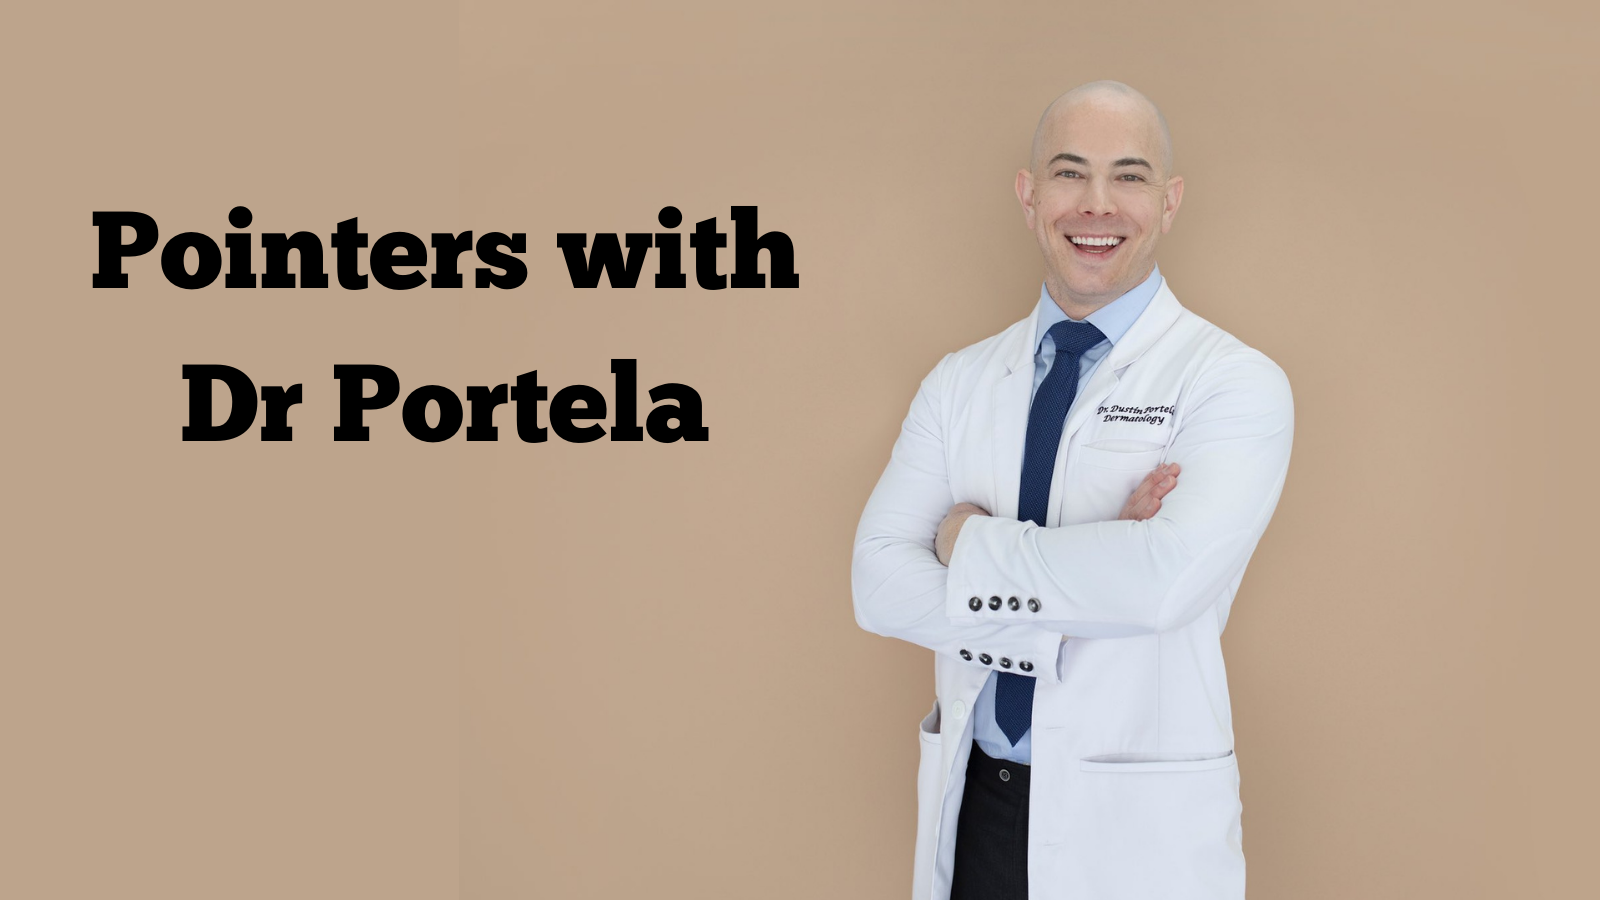 Pointers with Dr Portela: Tackling Warts